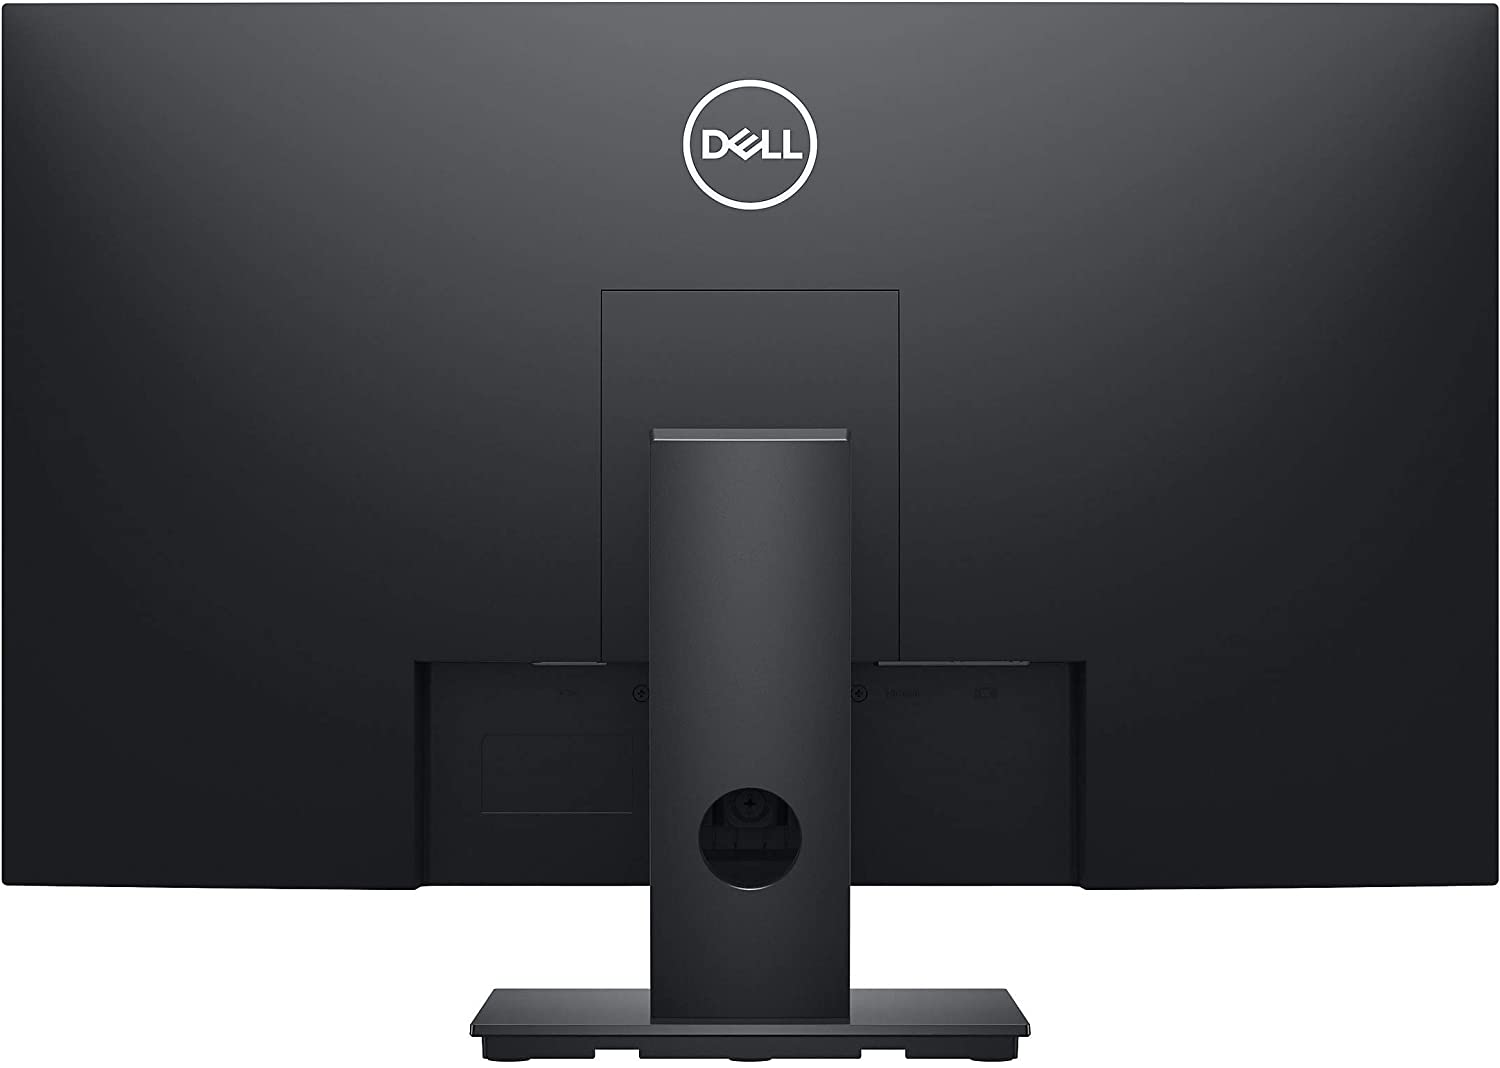 Dell E2720HS 27" LCD Anti-Glare Monitor - 1920 x 1080 Full HD Display - 60 Hz Refresh Rate - VGA & HDMI Input Connectors - LED Backlight Technology - in-Plane Switching Technology